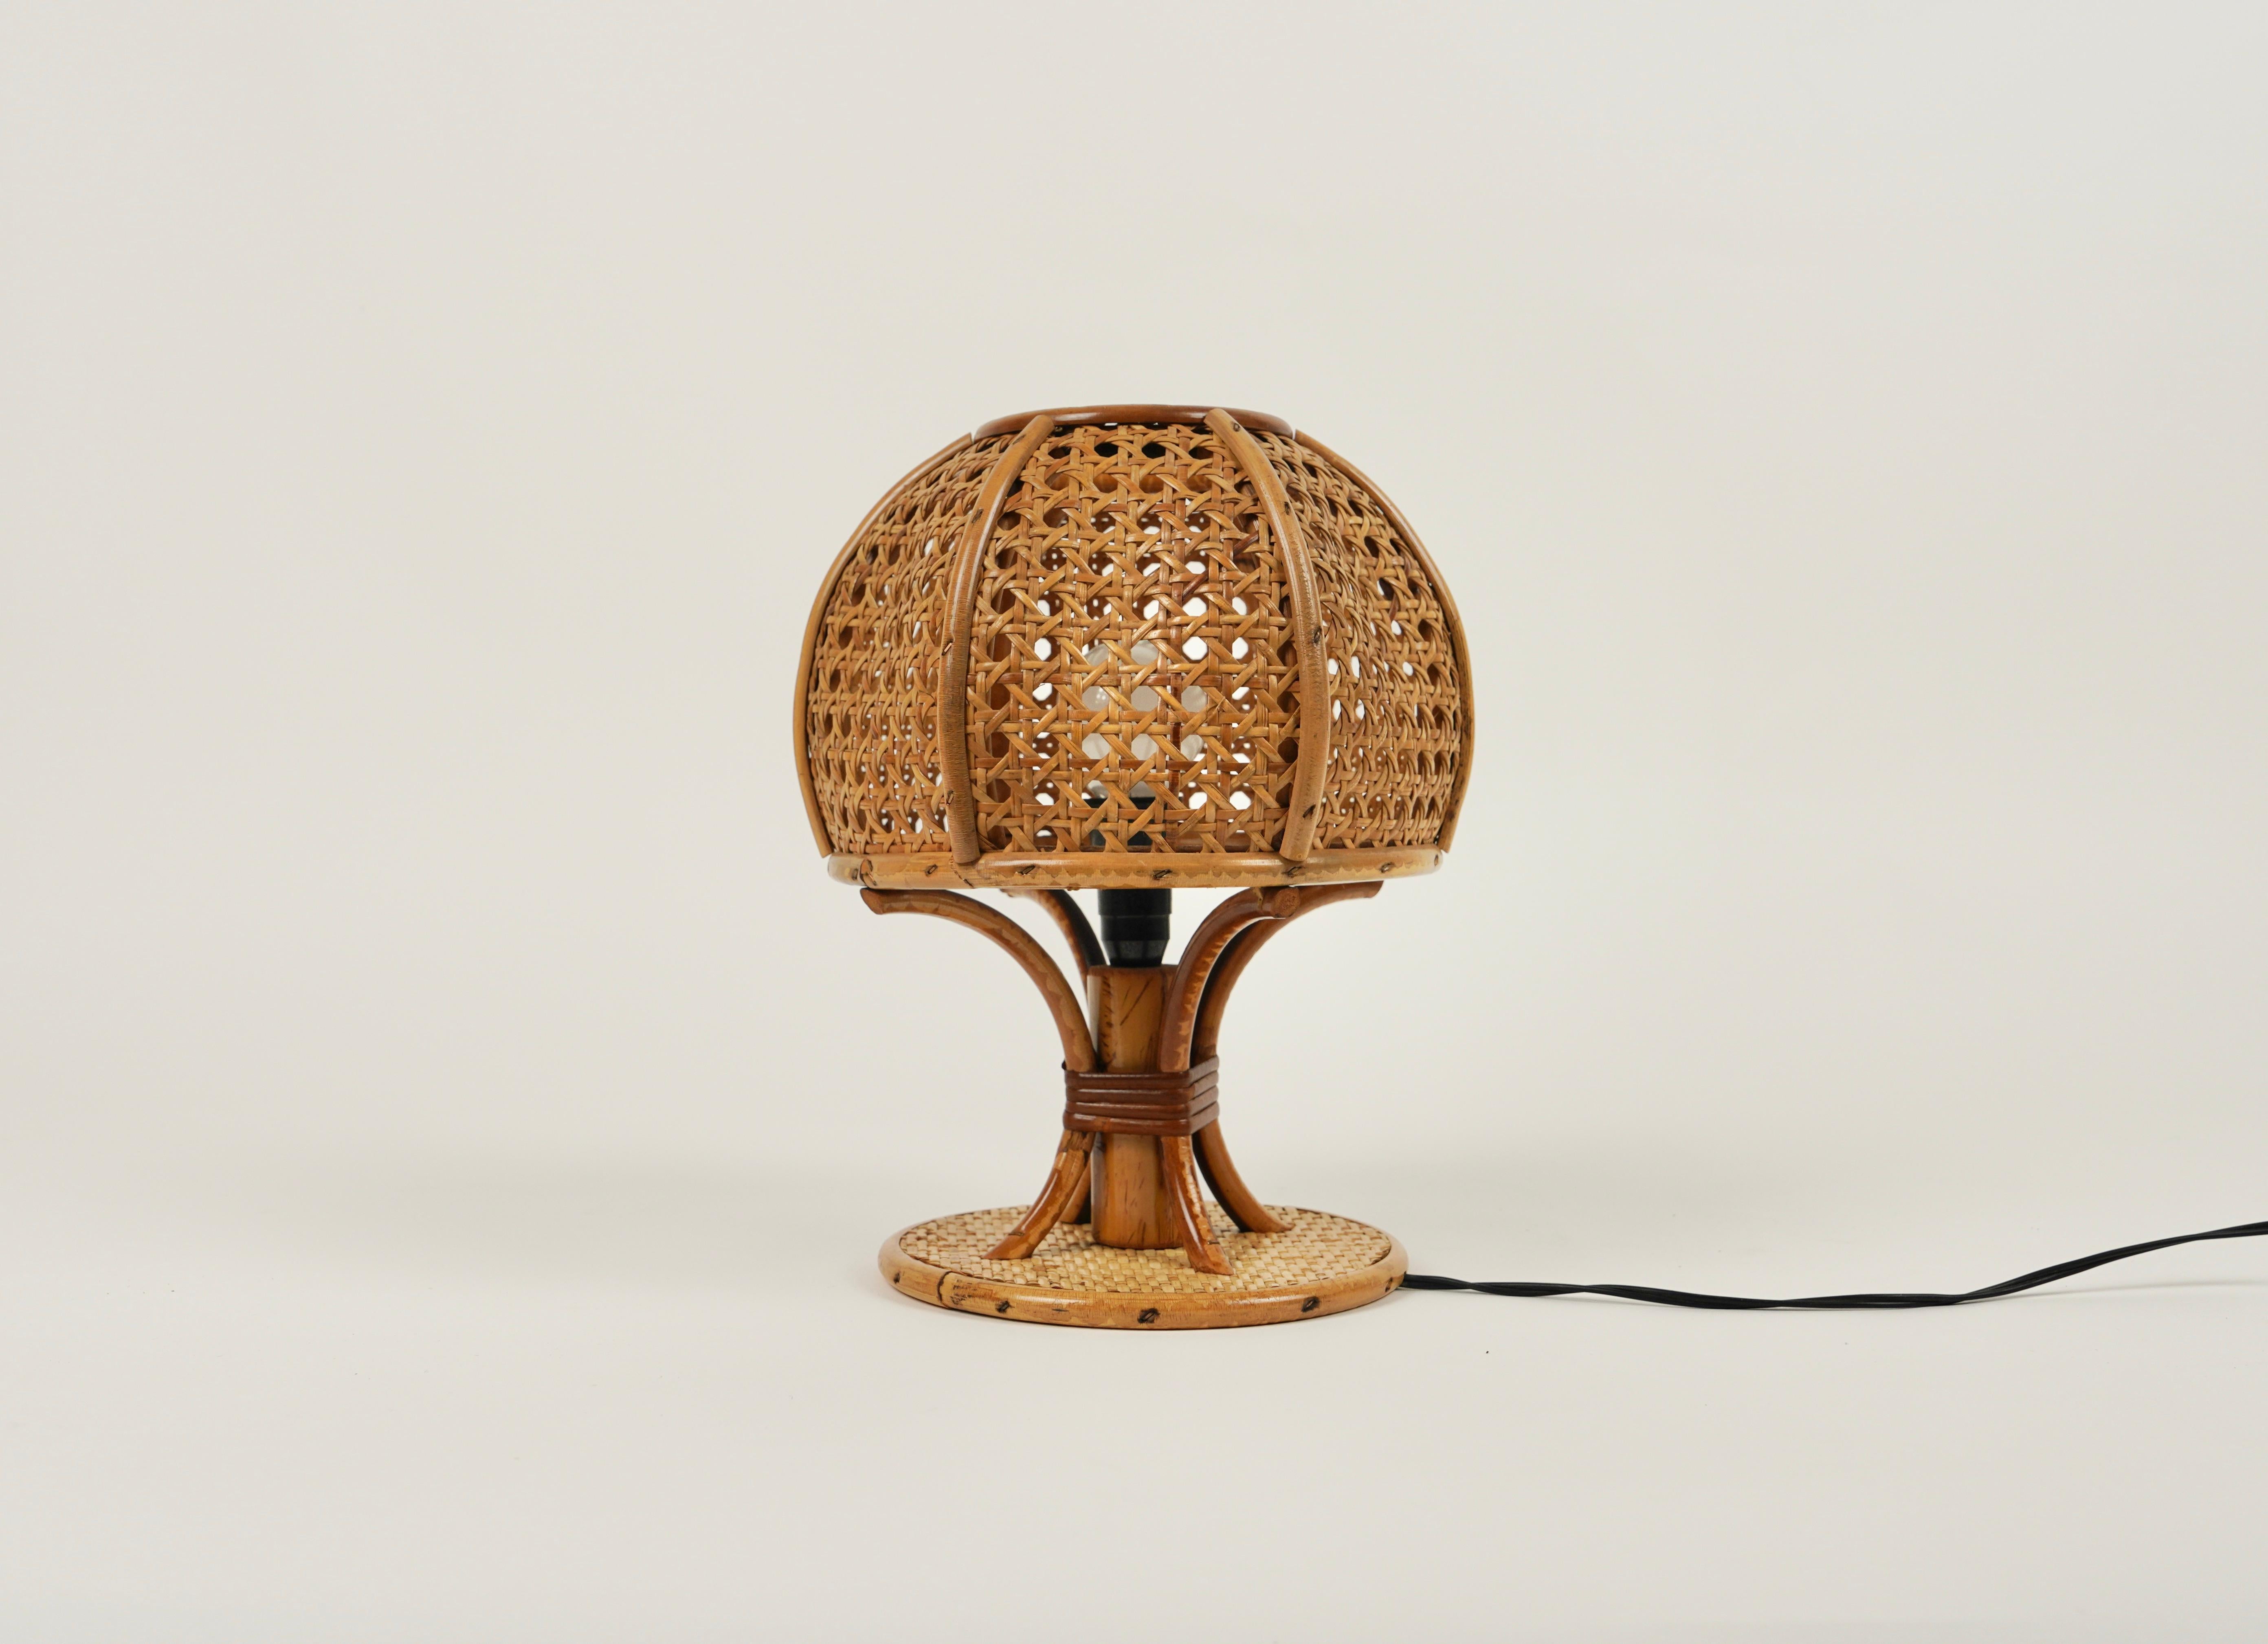 Midcentury Rattan and Wicker Table Lamp Louis Sognot Style, Italy, circa 1970s In Good Condition For Sale In Rome, IT